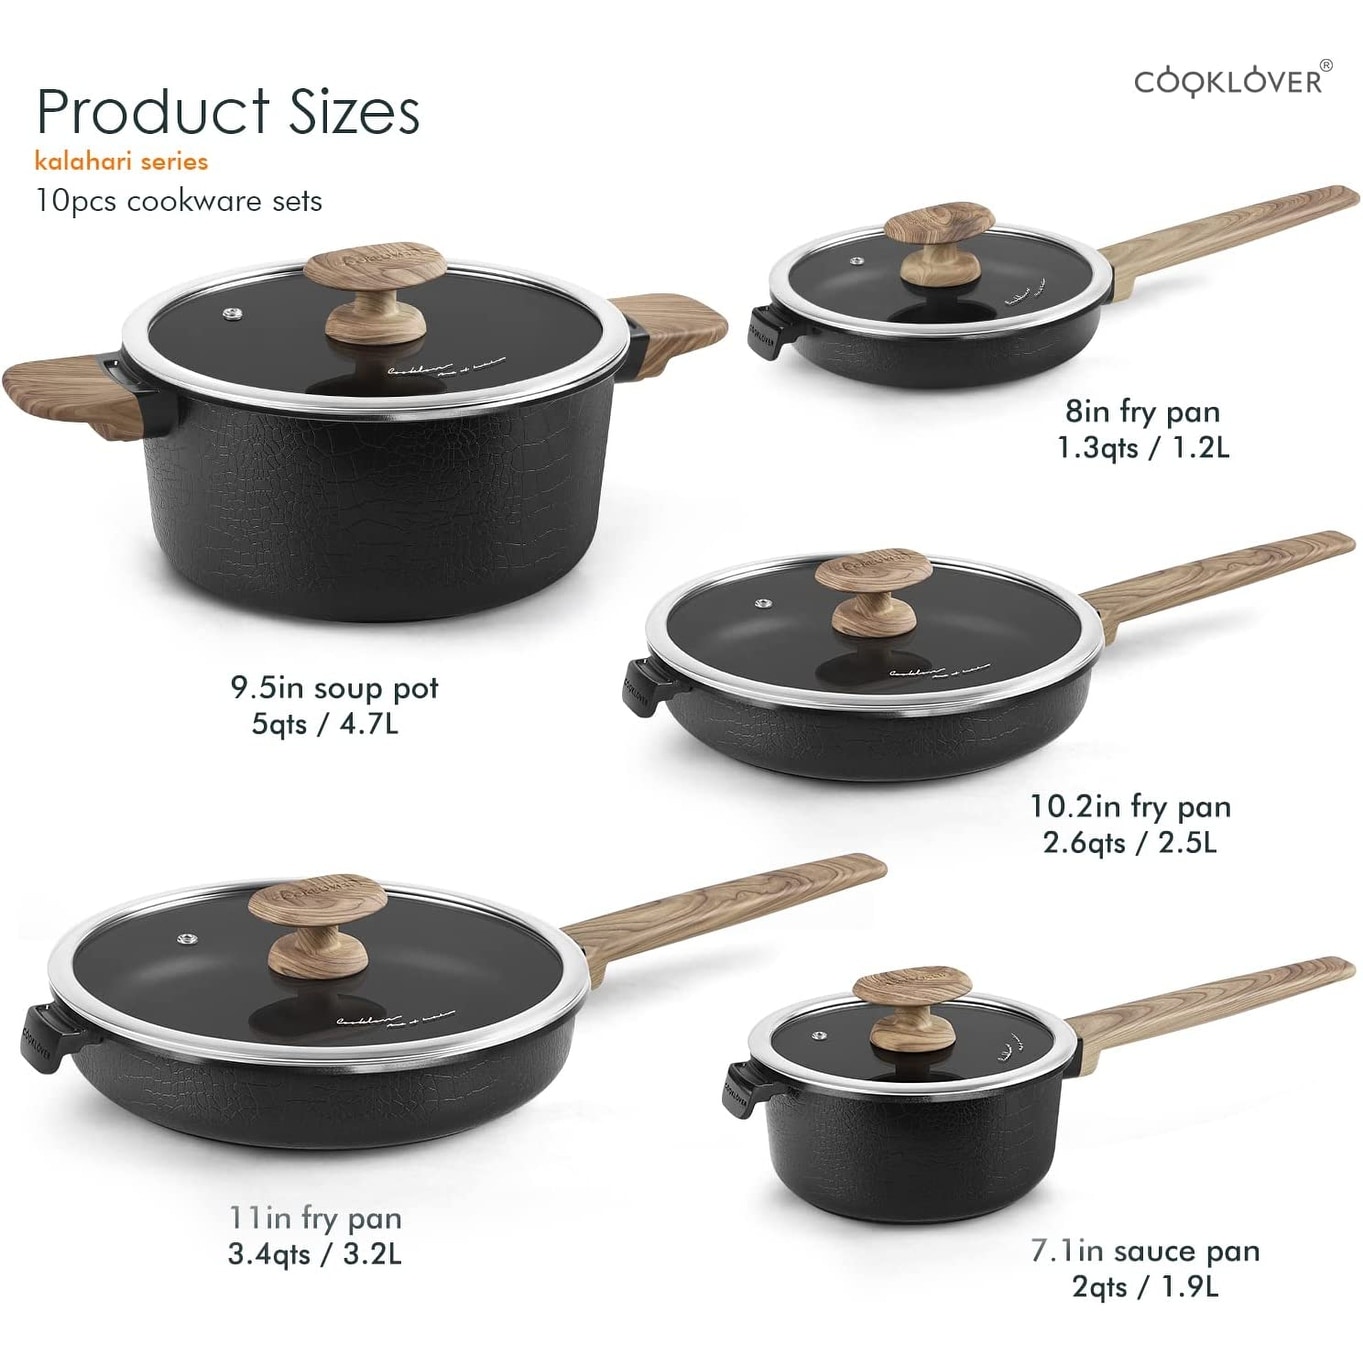 https://ak1.ostkcdn.com/images/products/is/images/direct/53e3a50515ec2f725aa4f30a1a747aea996d170d/Nonstick-Ceramic-Cookware-Set-Non-Toxic-100%25-PFOA-Free-Compatible-Induction-Pots-and-Pans-Sets-with-Glass-Lids-10-Pieces.jpg